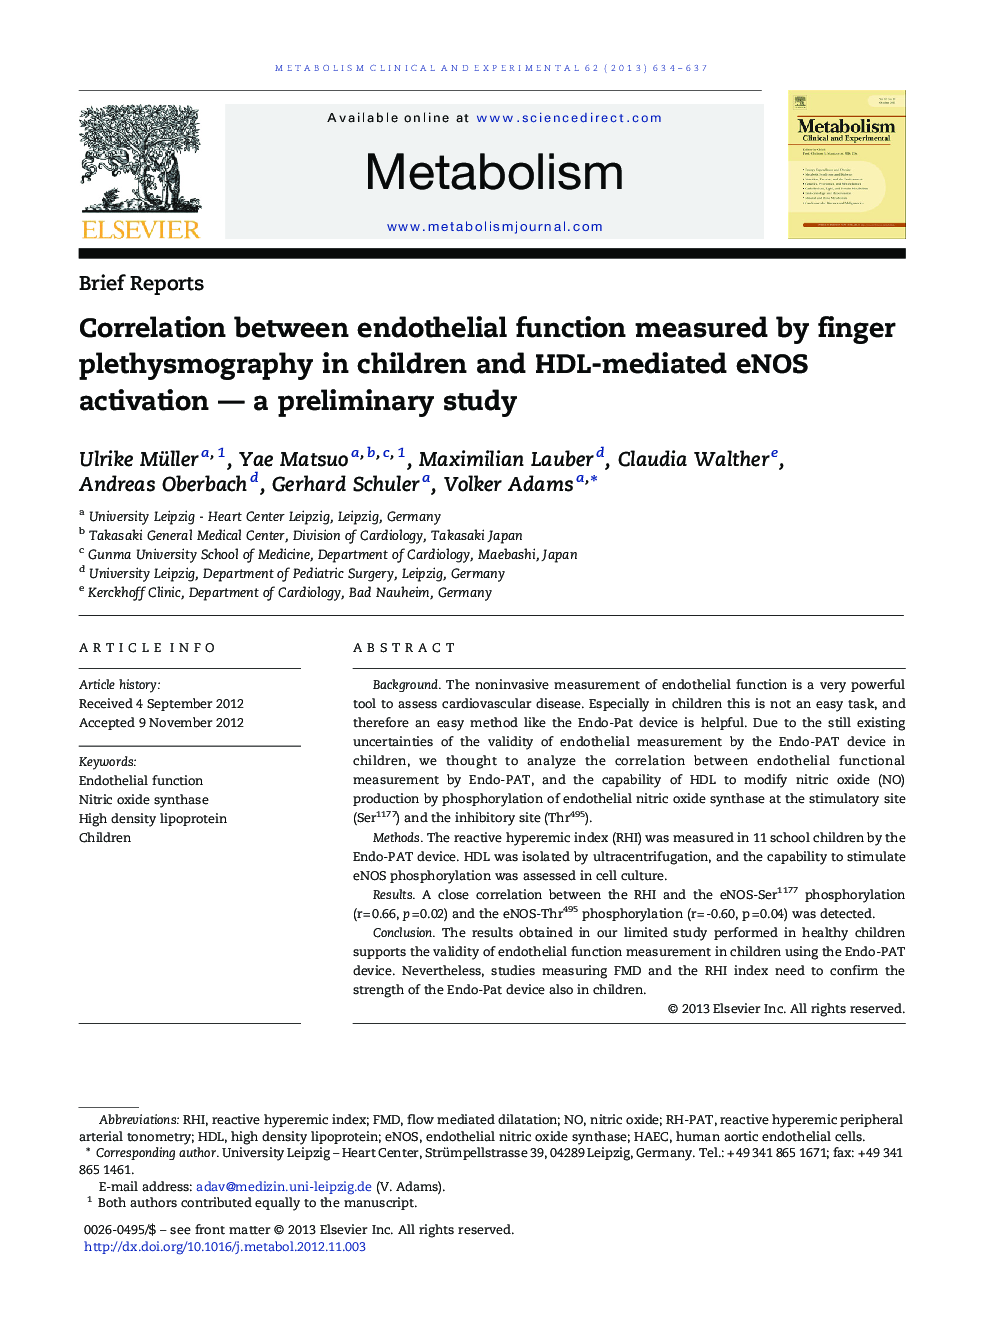 Correlation between endothelial function measured by finger plethysmography in children and HDL-mediated eNOS activation — a preliminary study